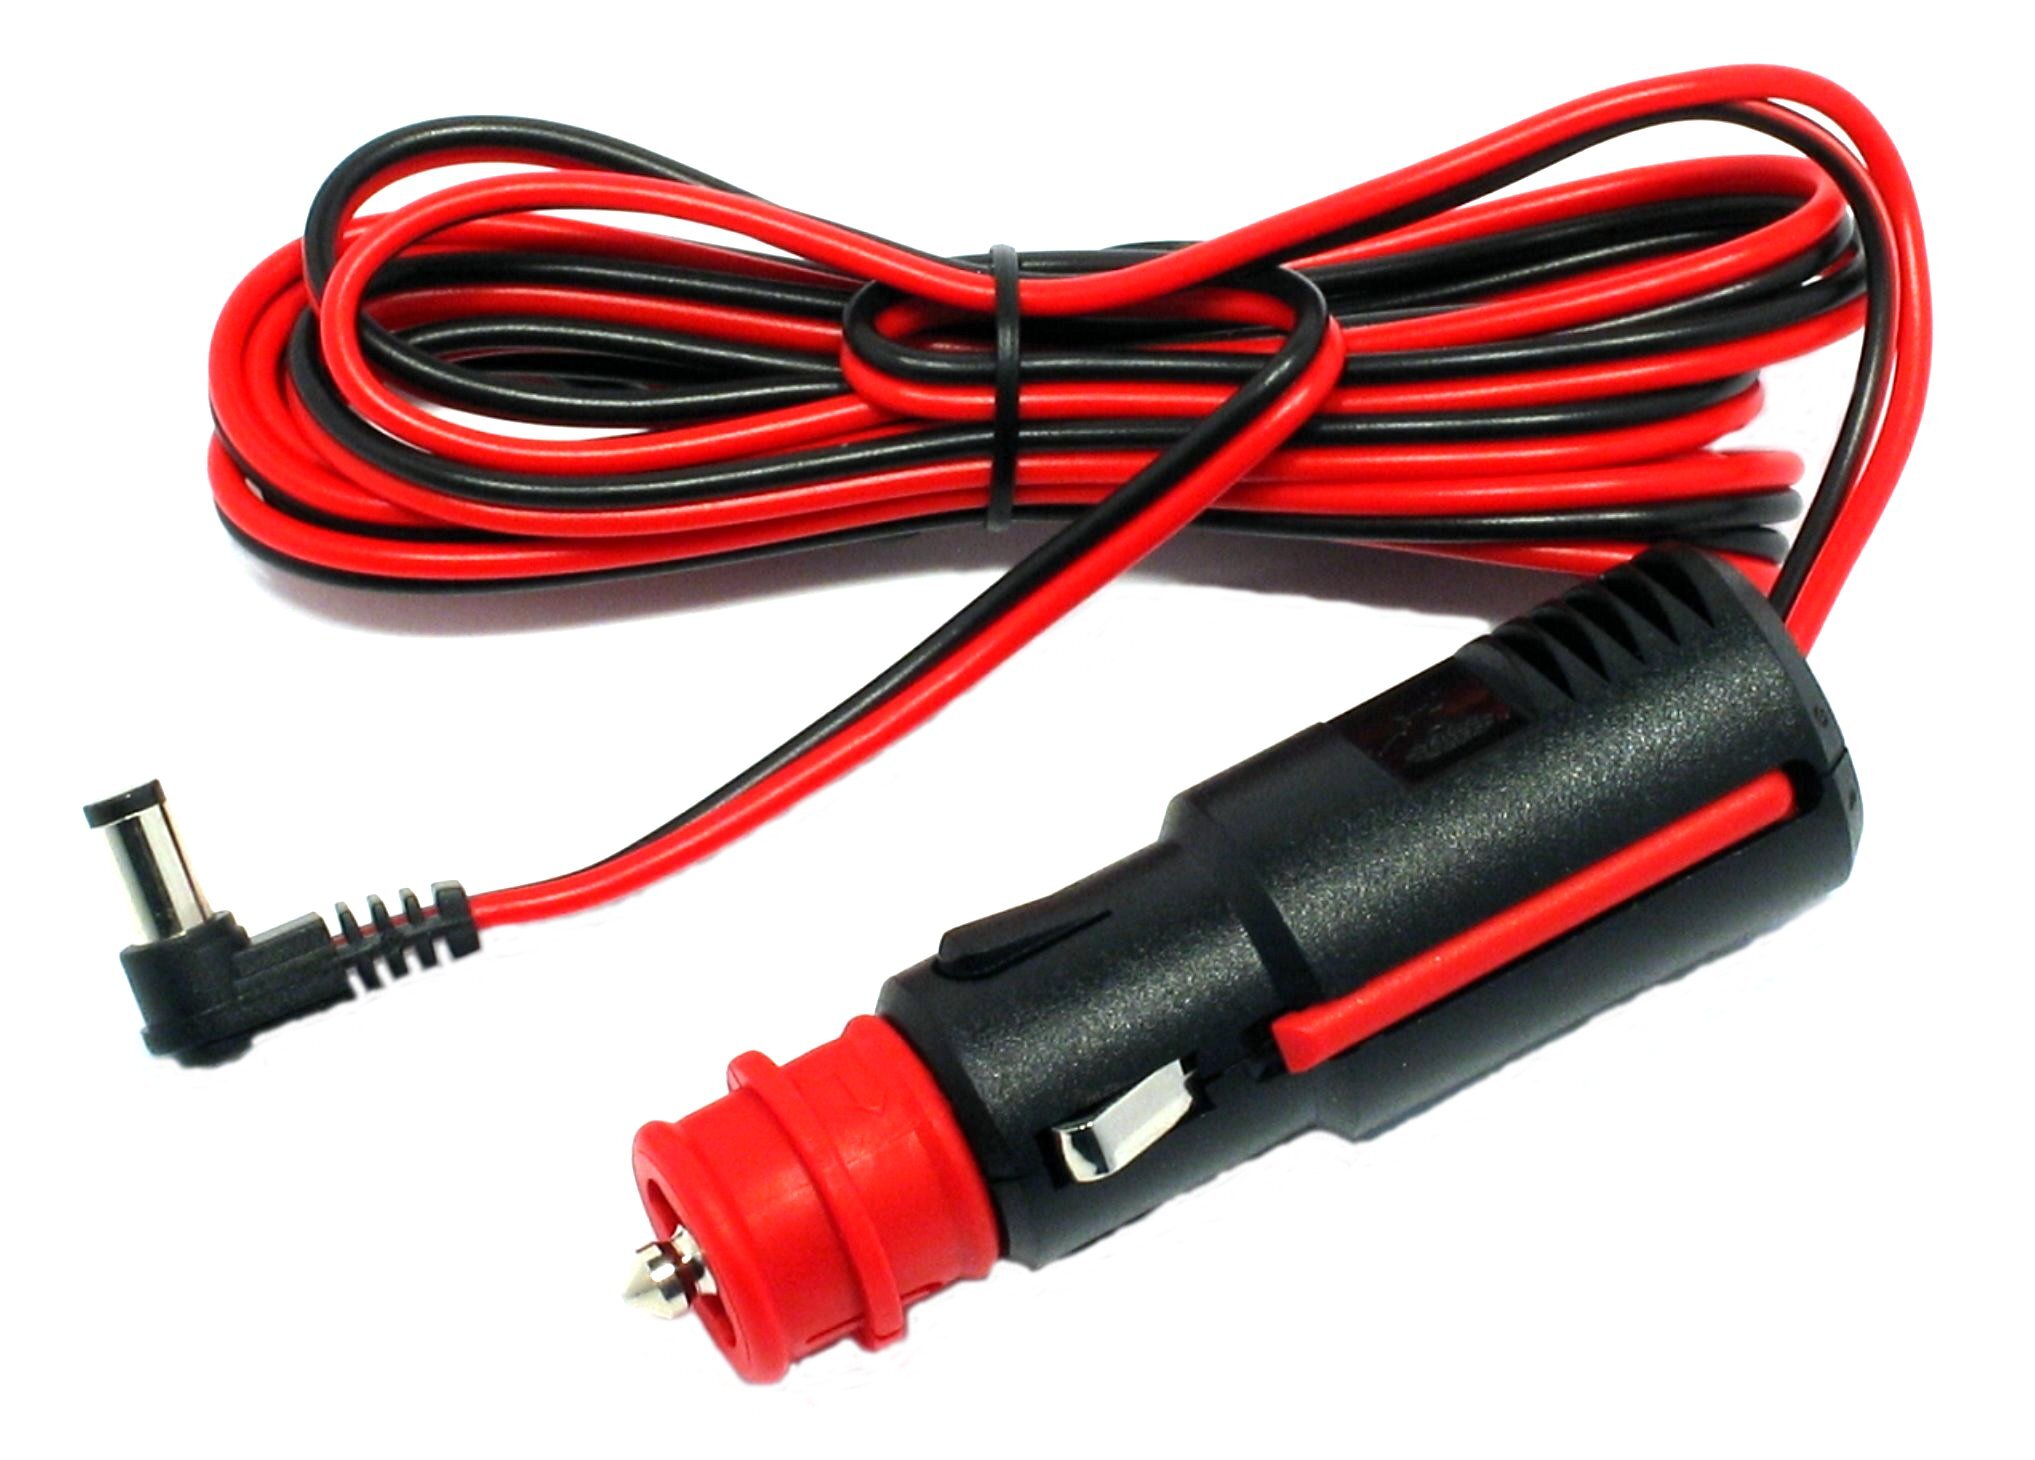 Car adapter cable 12 V
including cigarette lighter connector, length: 1,8 m